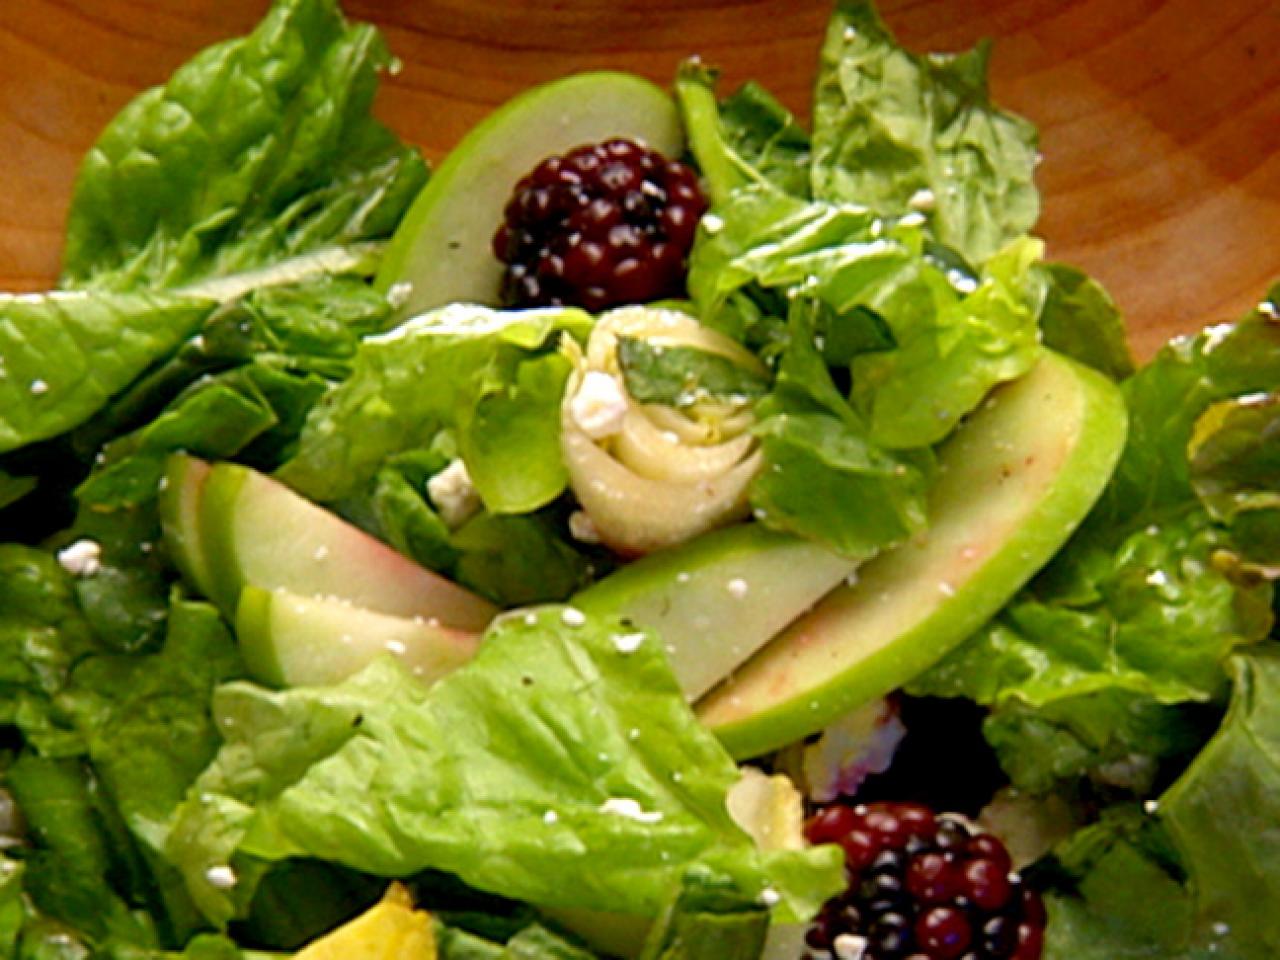 Green Salad With Apple Cider Vinaigrette Recipe - NYT Cooking